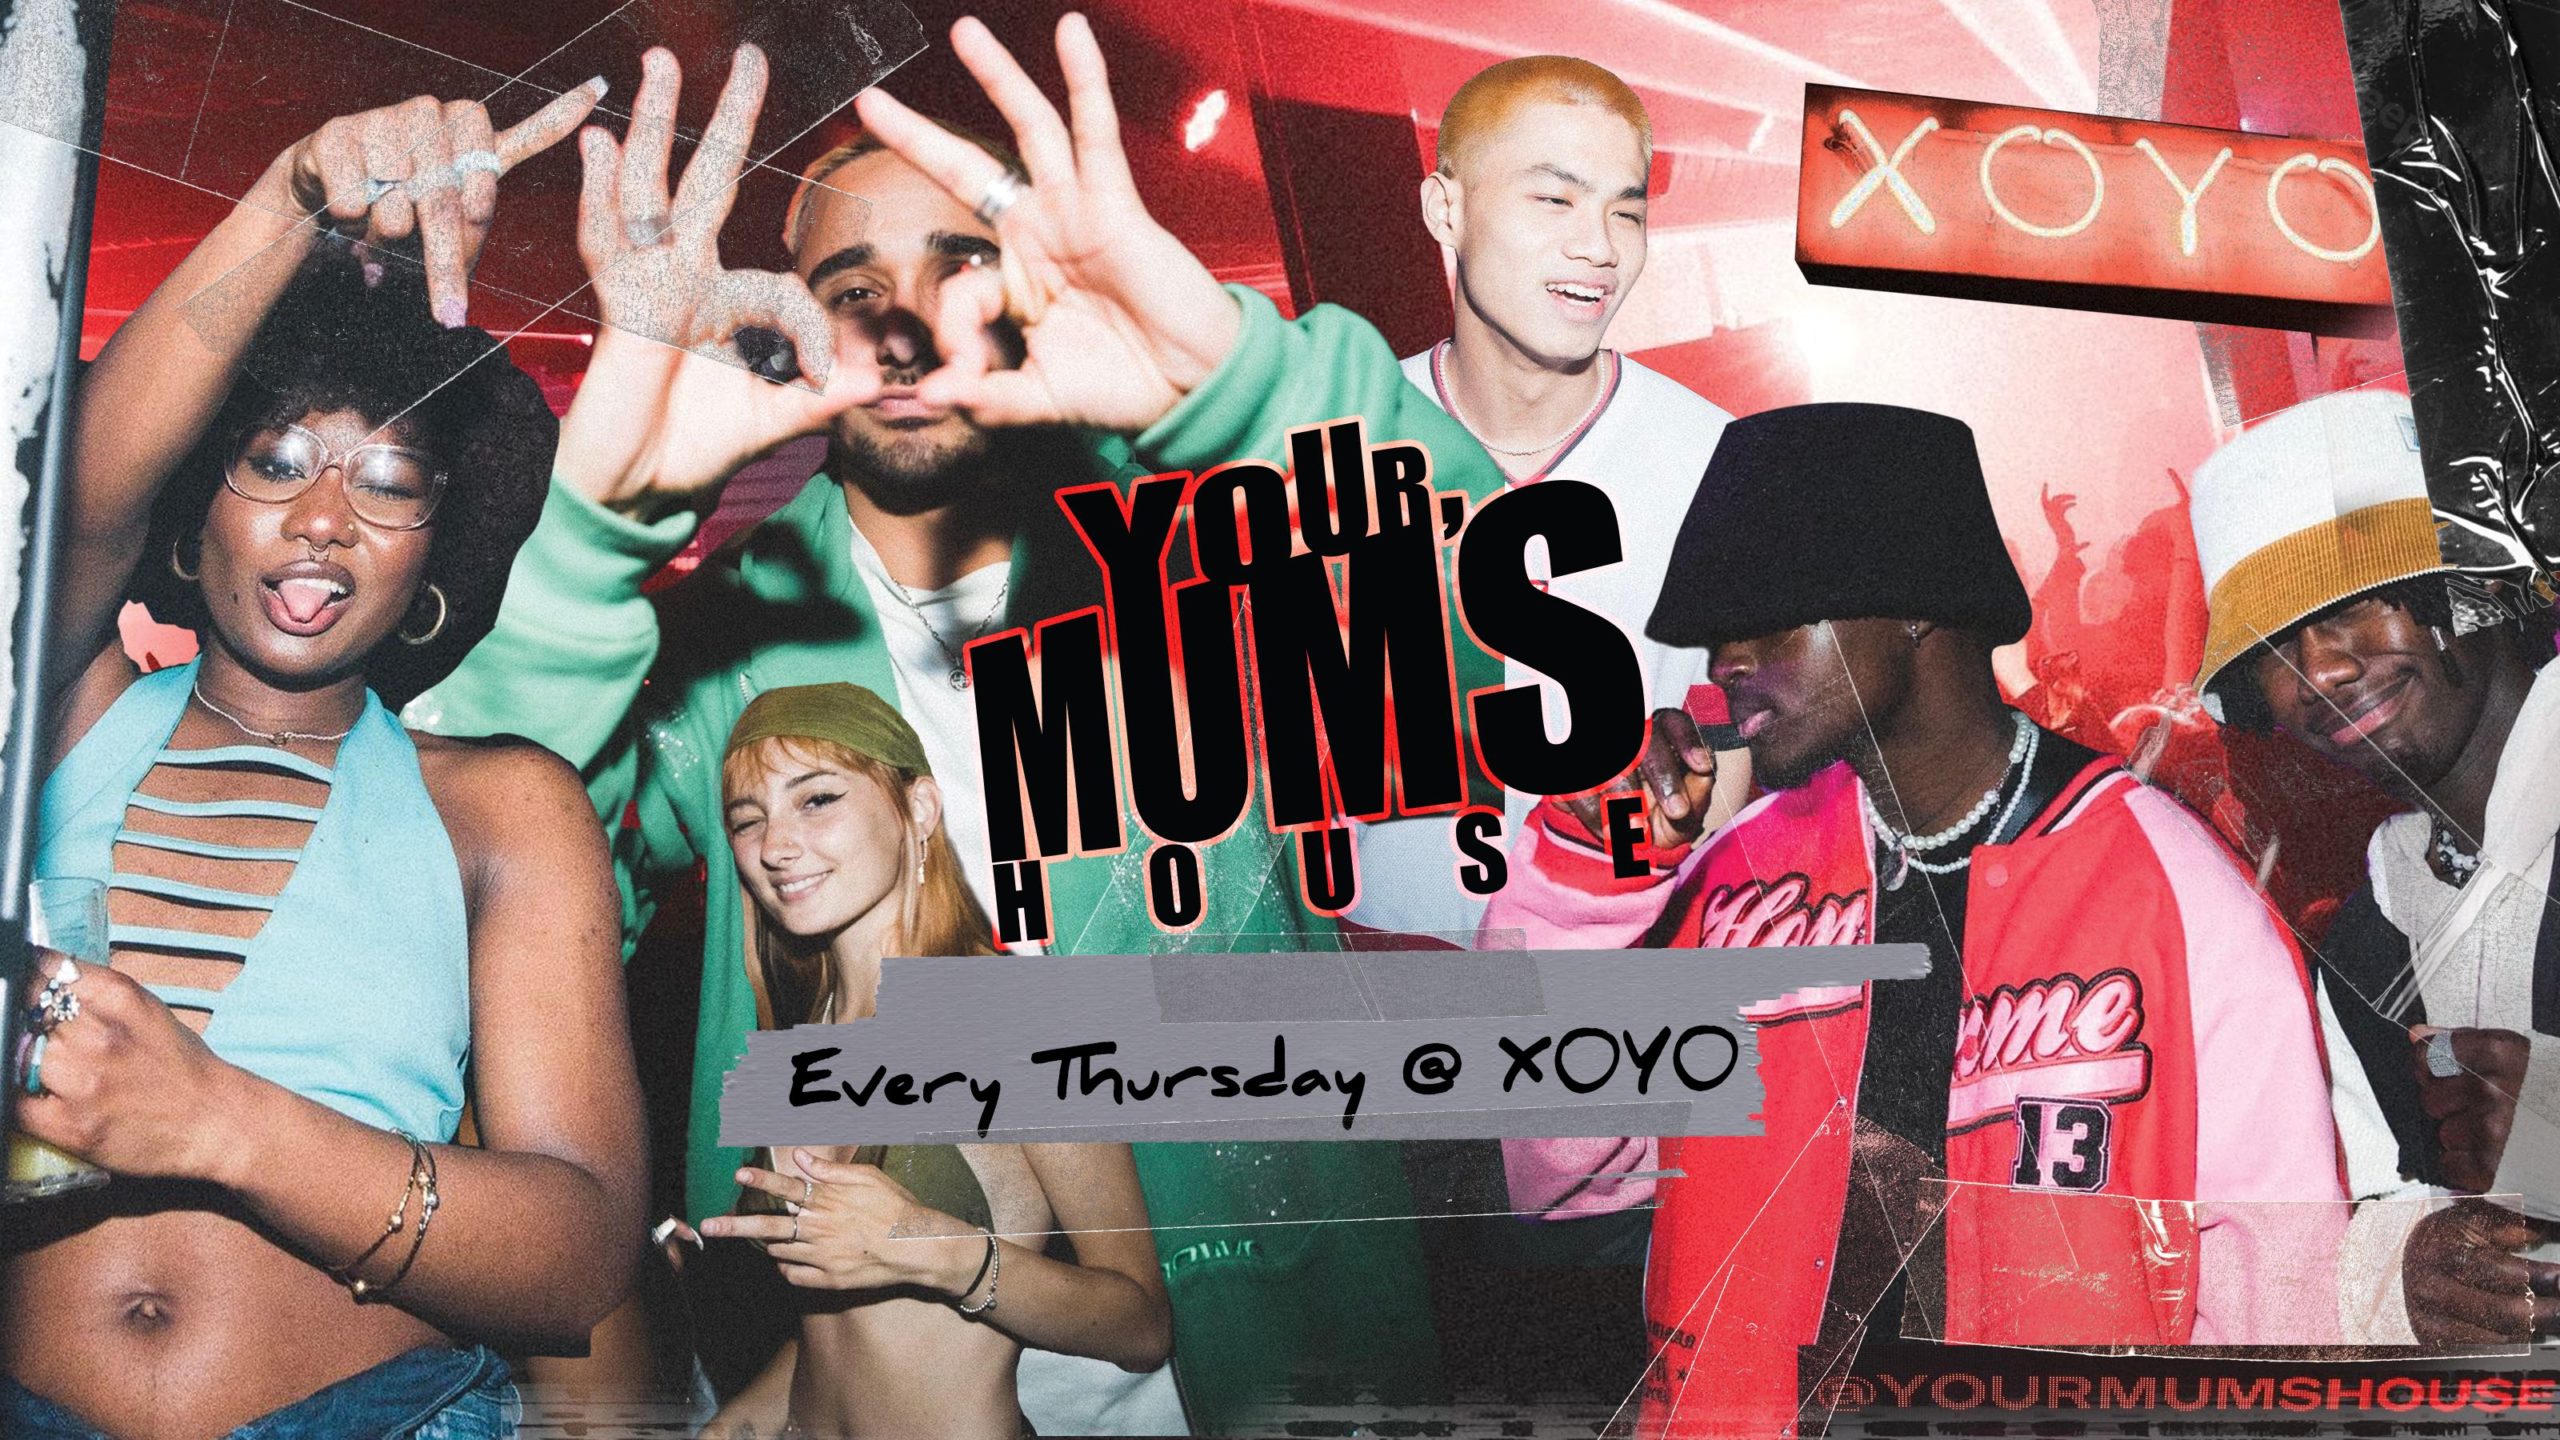 Your Mum's House at XOYO London every Thursday.